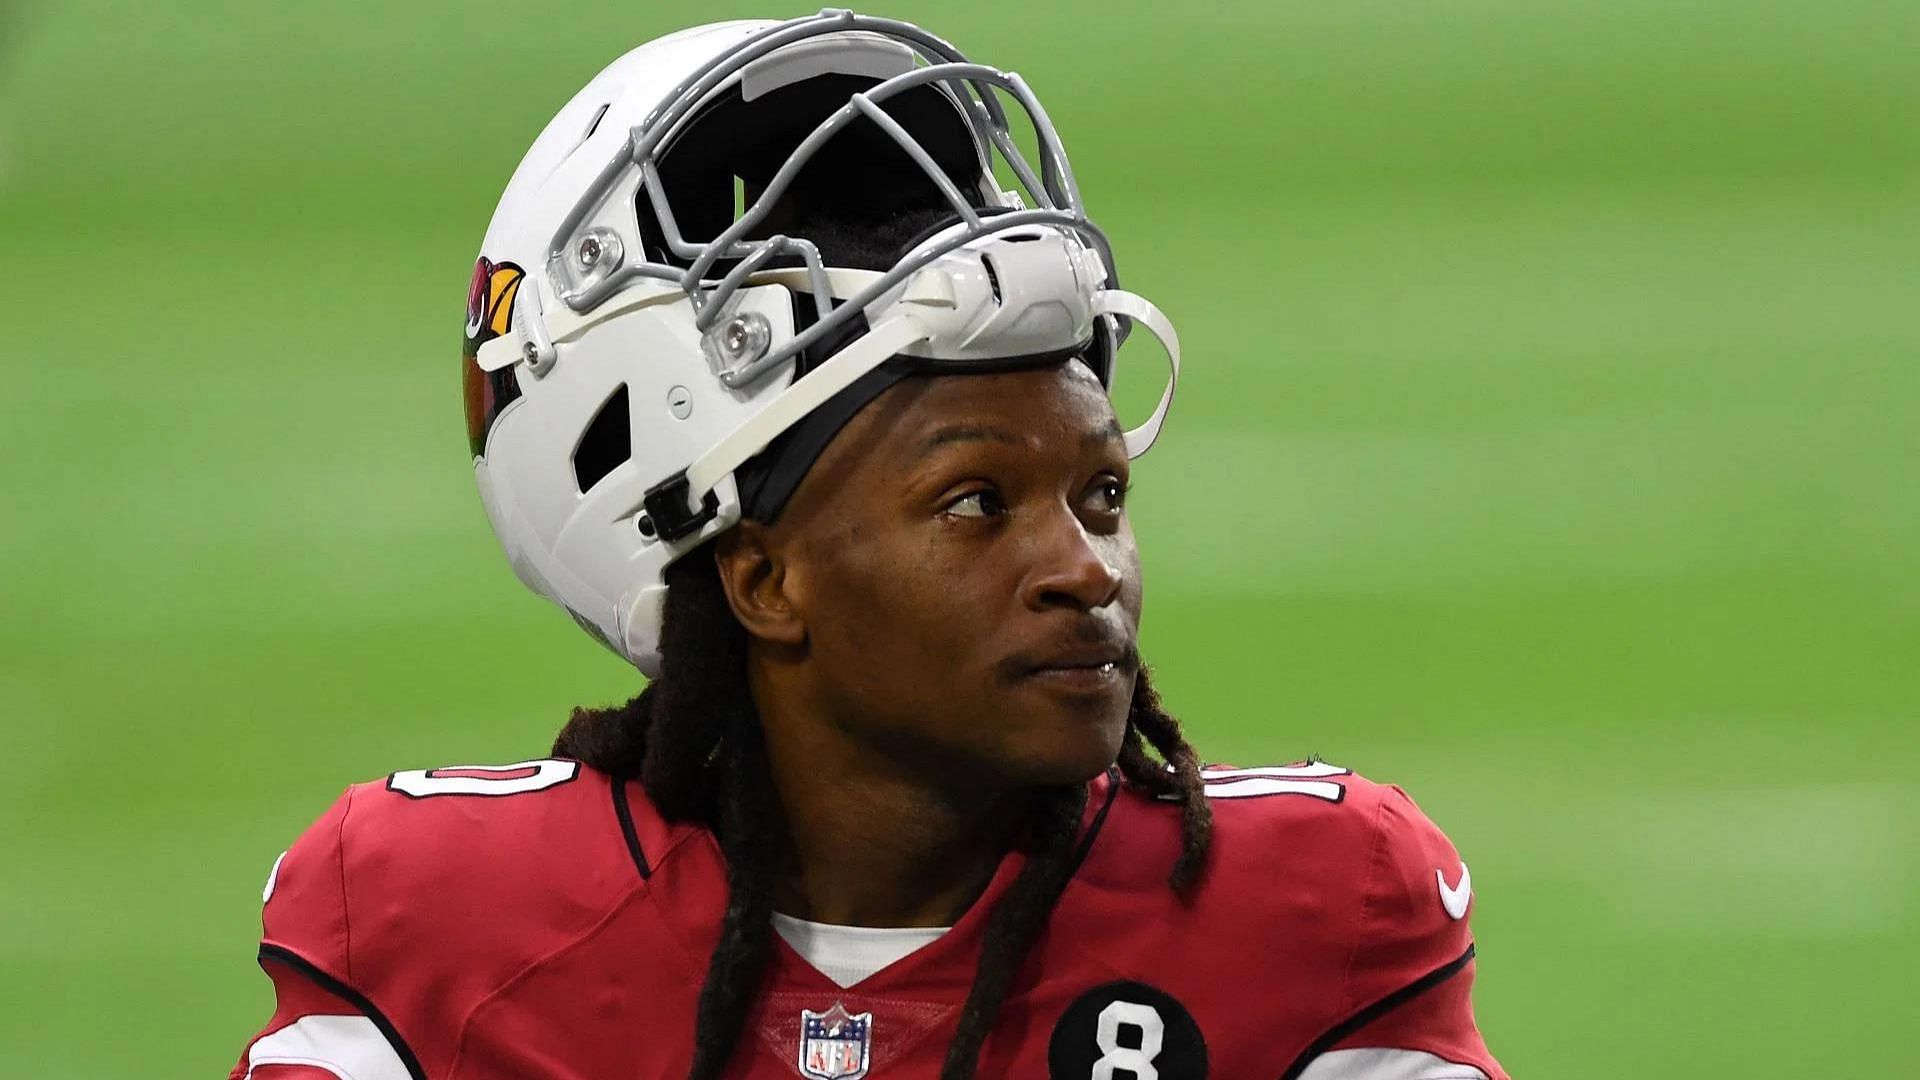 DeAndre Hopkins #10 of the Arizona Cardinals looks on during warmups before the game against the Miami Dolphins at State Farm Stadium on November 08, 2020 in Glendale, Arizona.